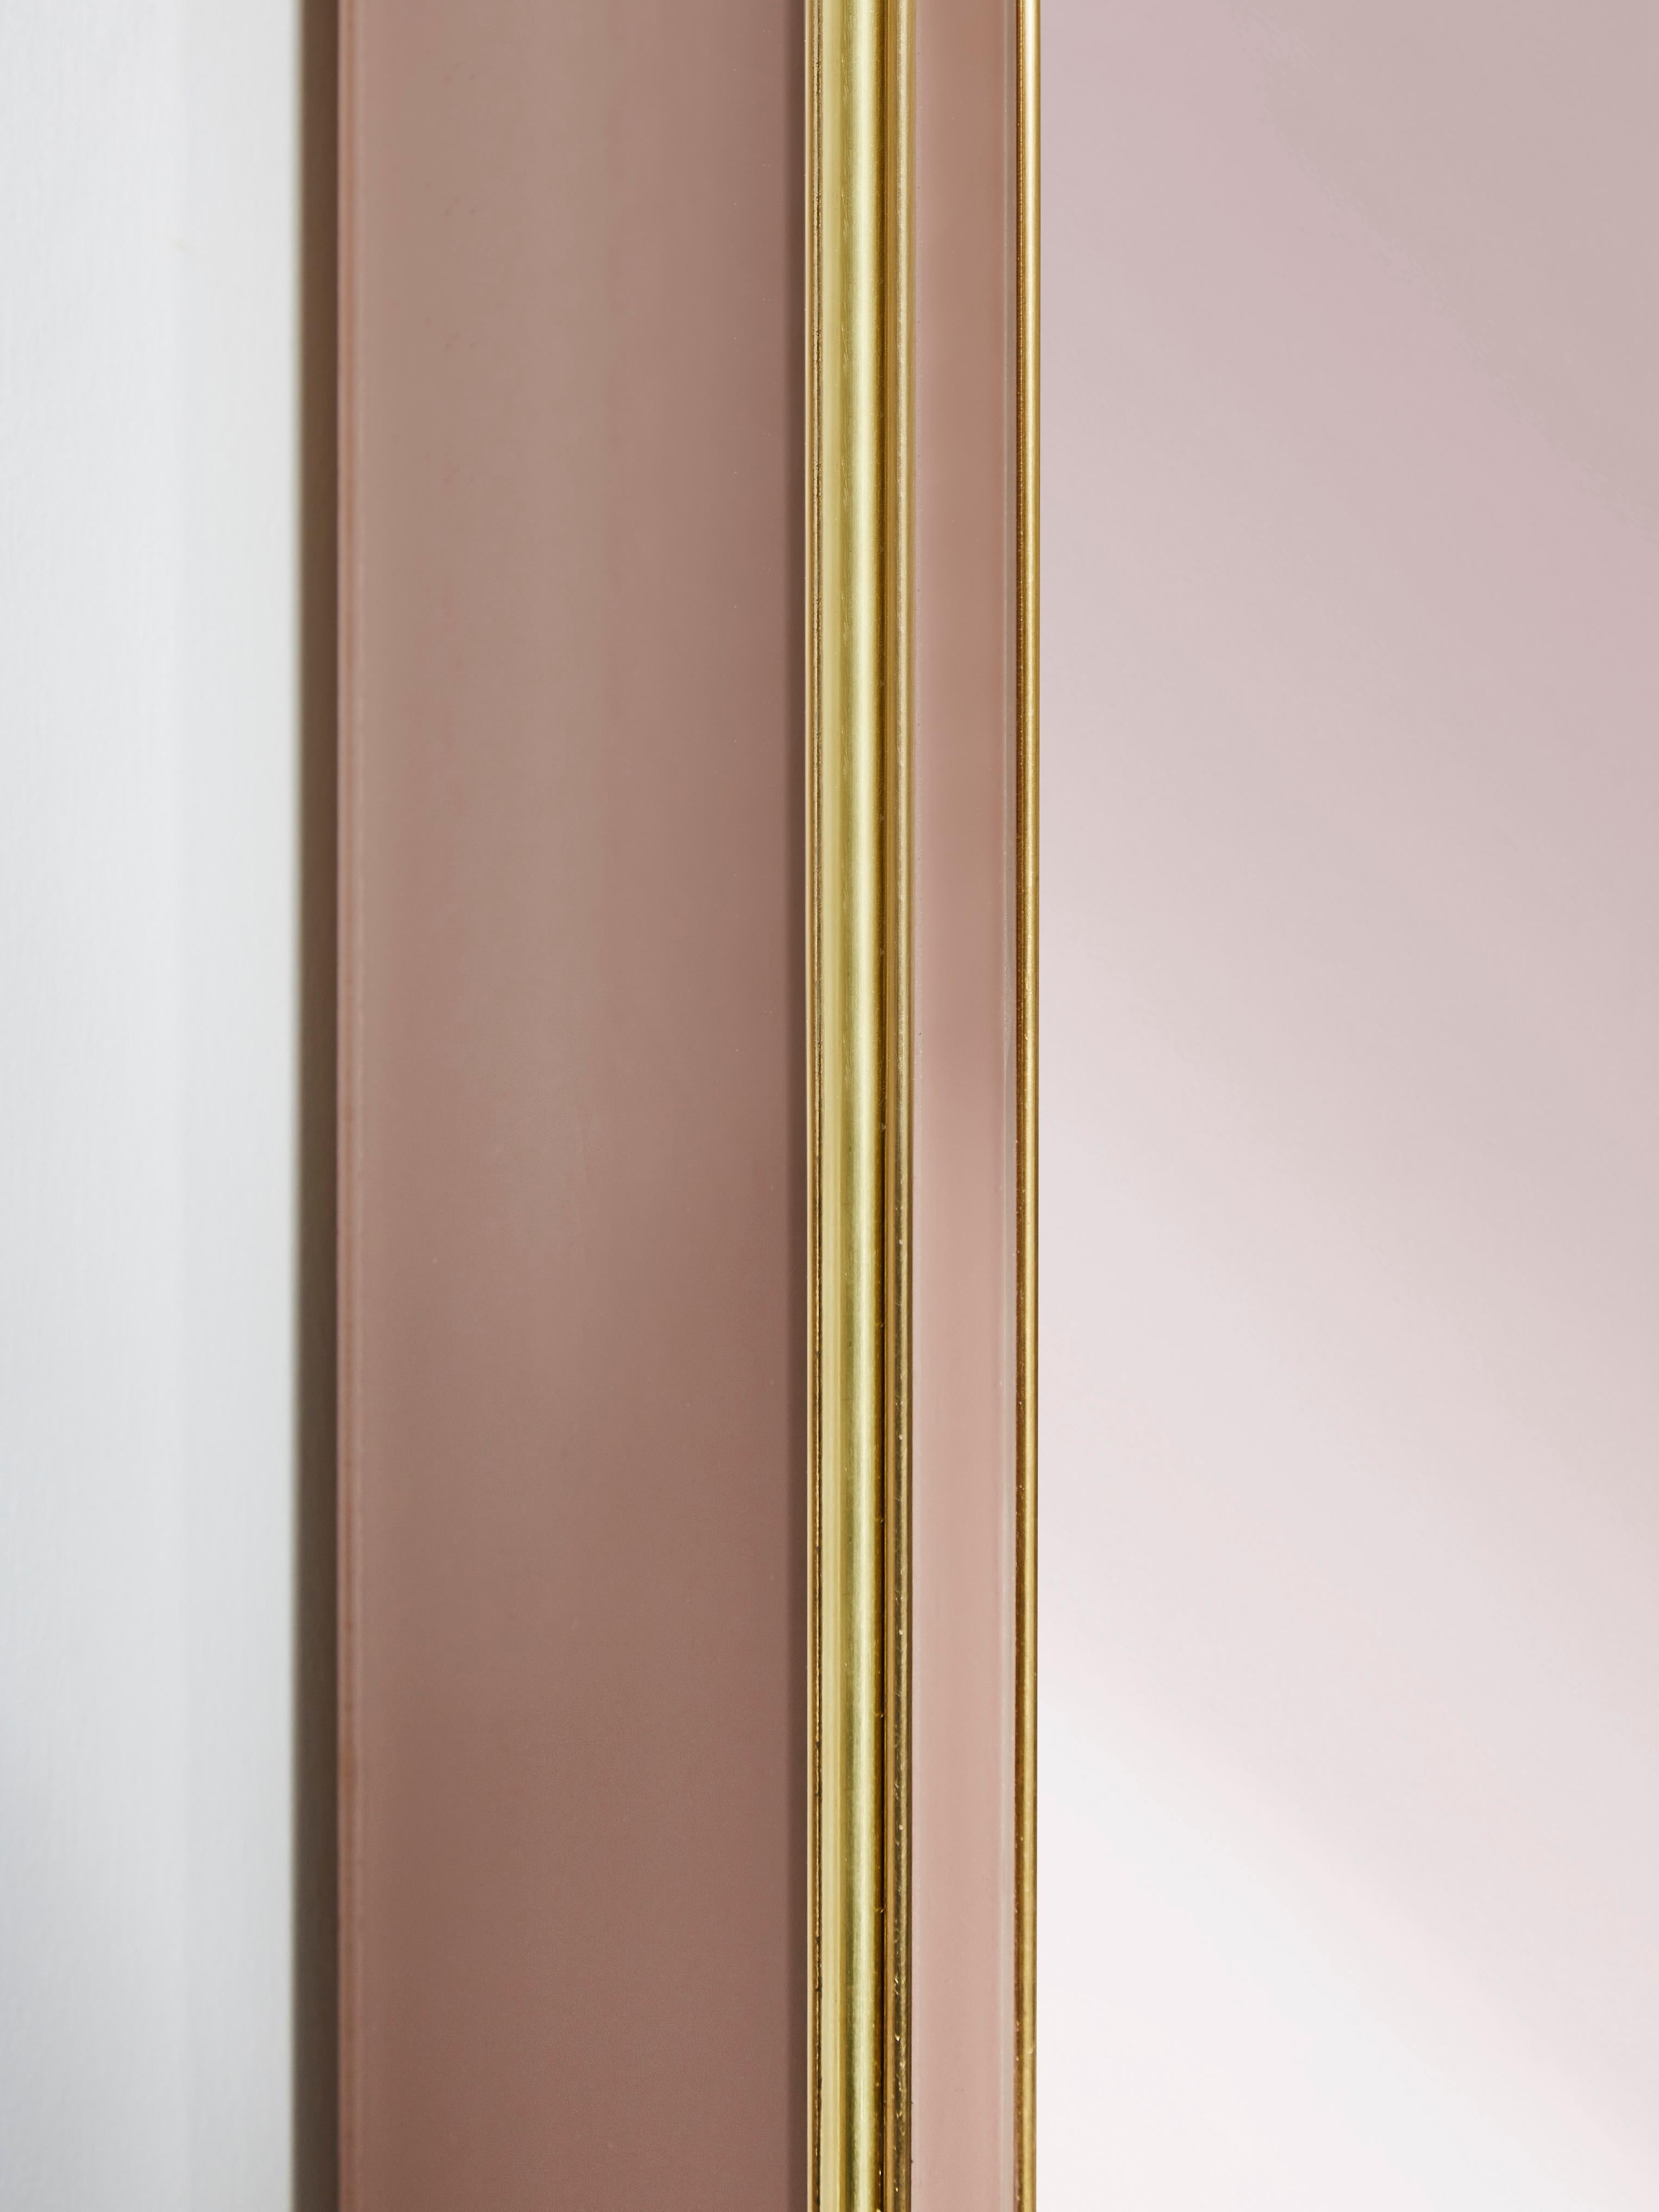 Splendid rectangular mirror with frame in brass and pink tainted glass. 
Creation by Studio Glustin.